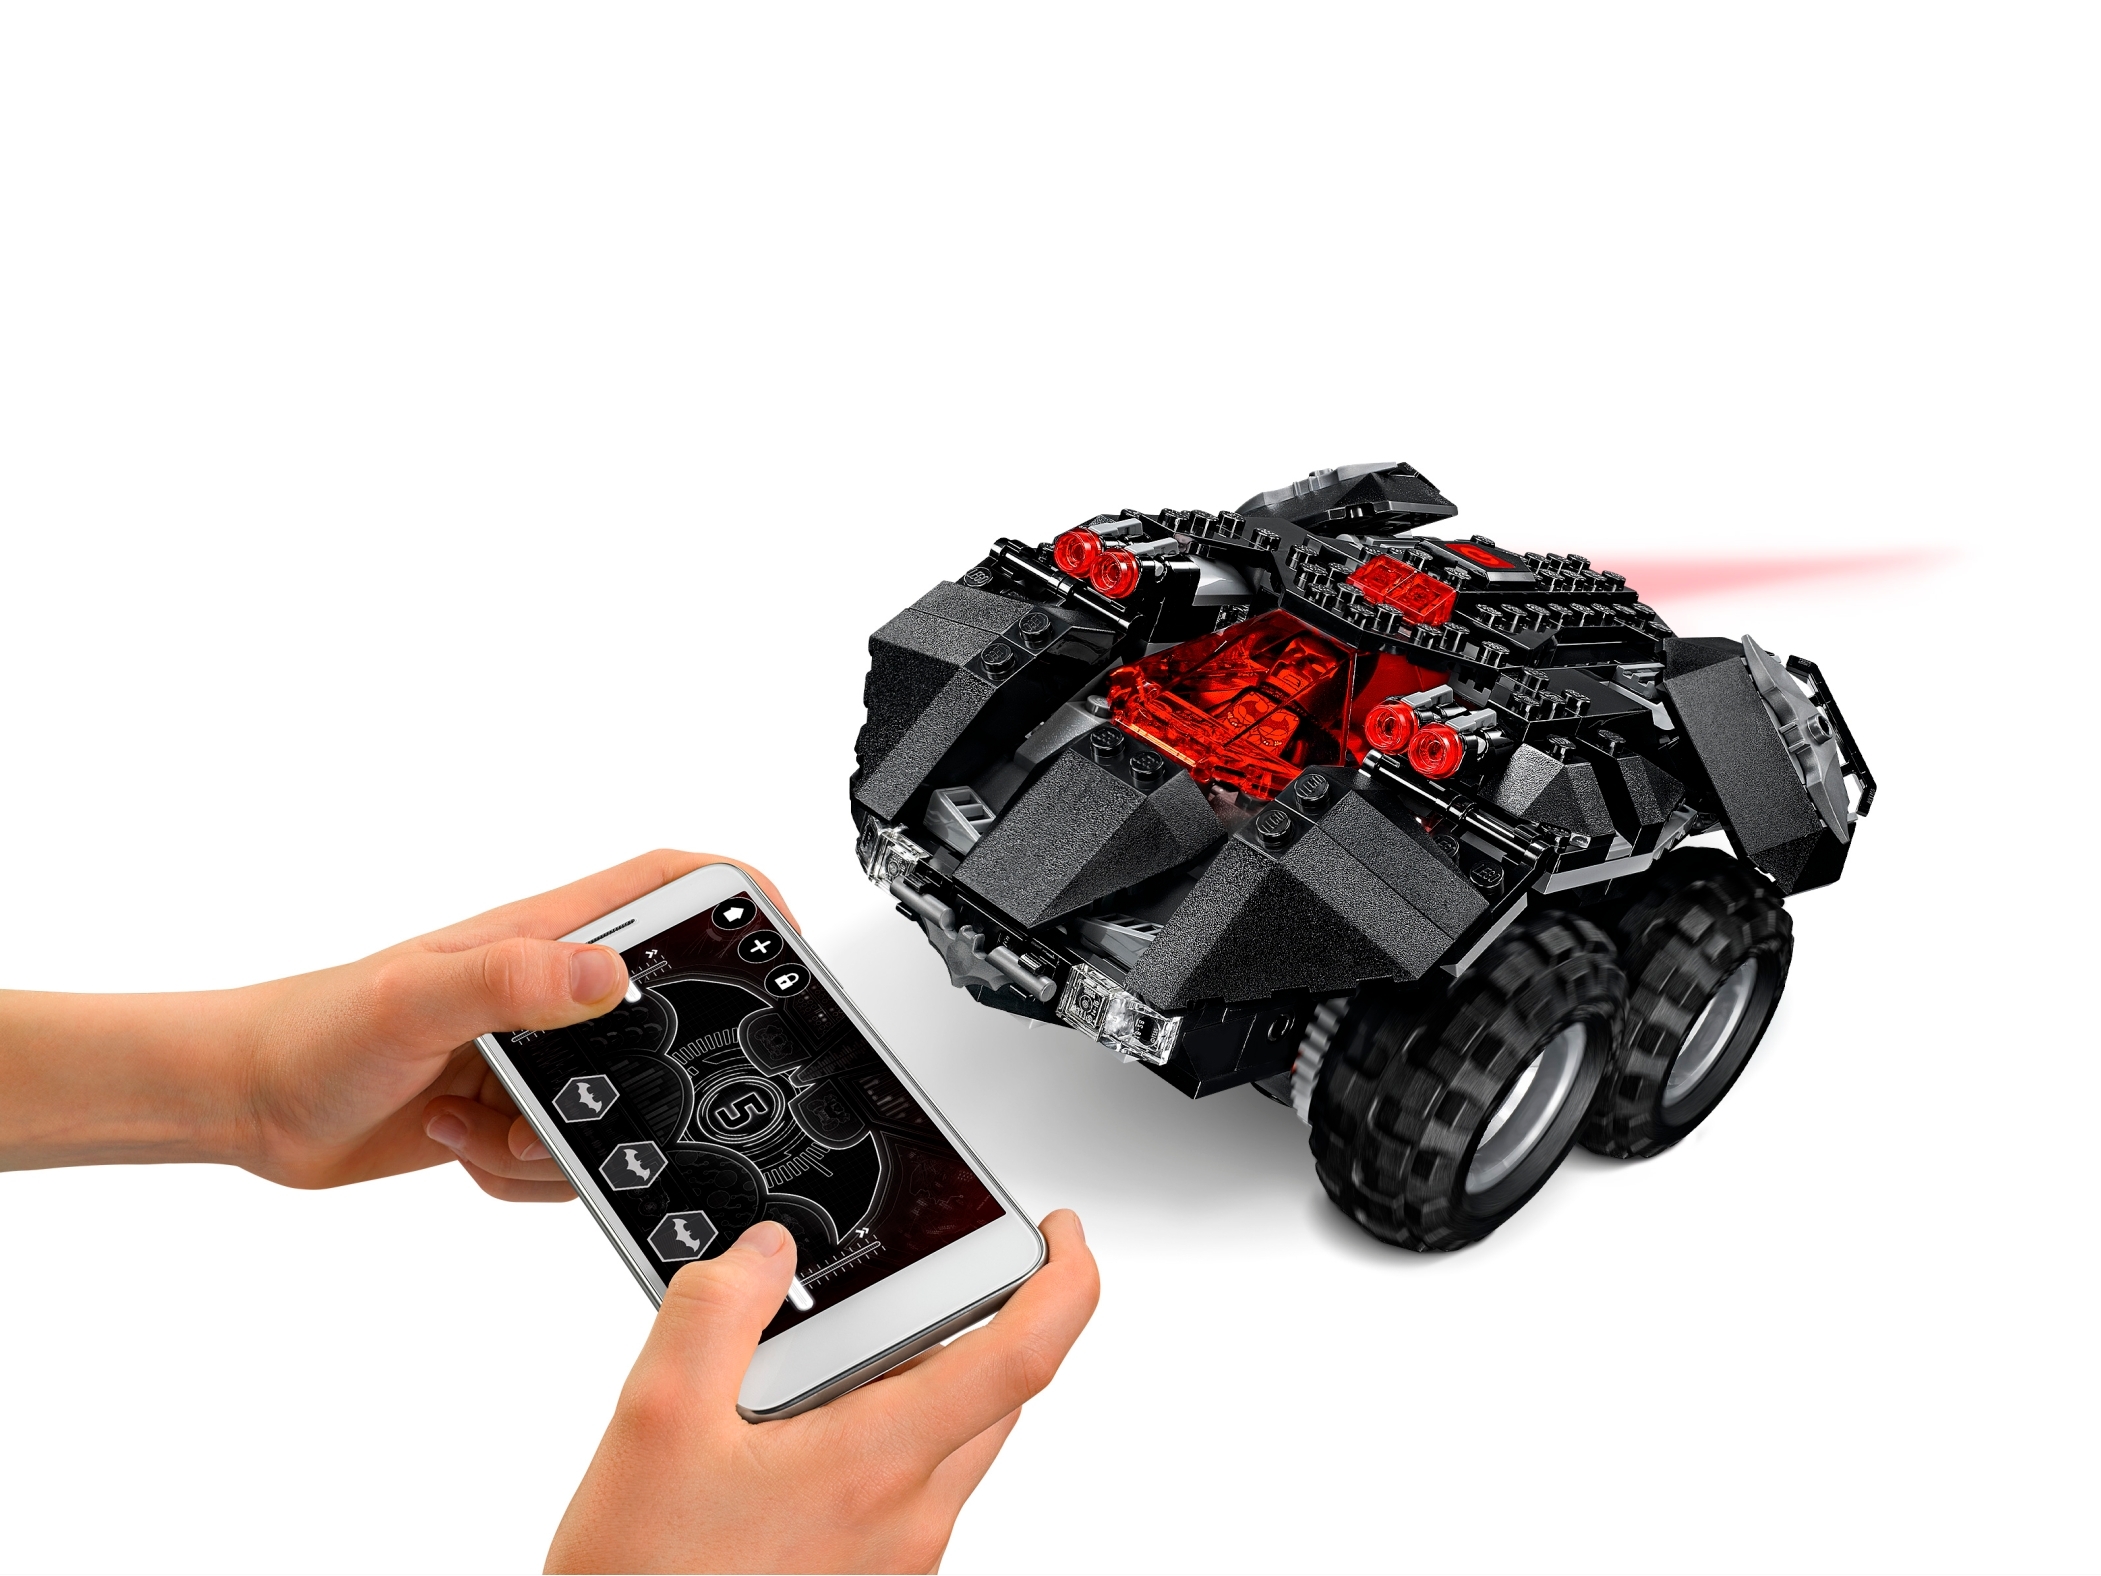 App-Controlled Batmobile 76112 | Powered UP | Buy online at the Official  LEGO® Shop US